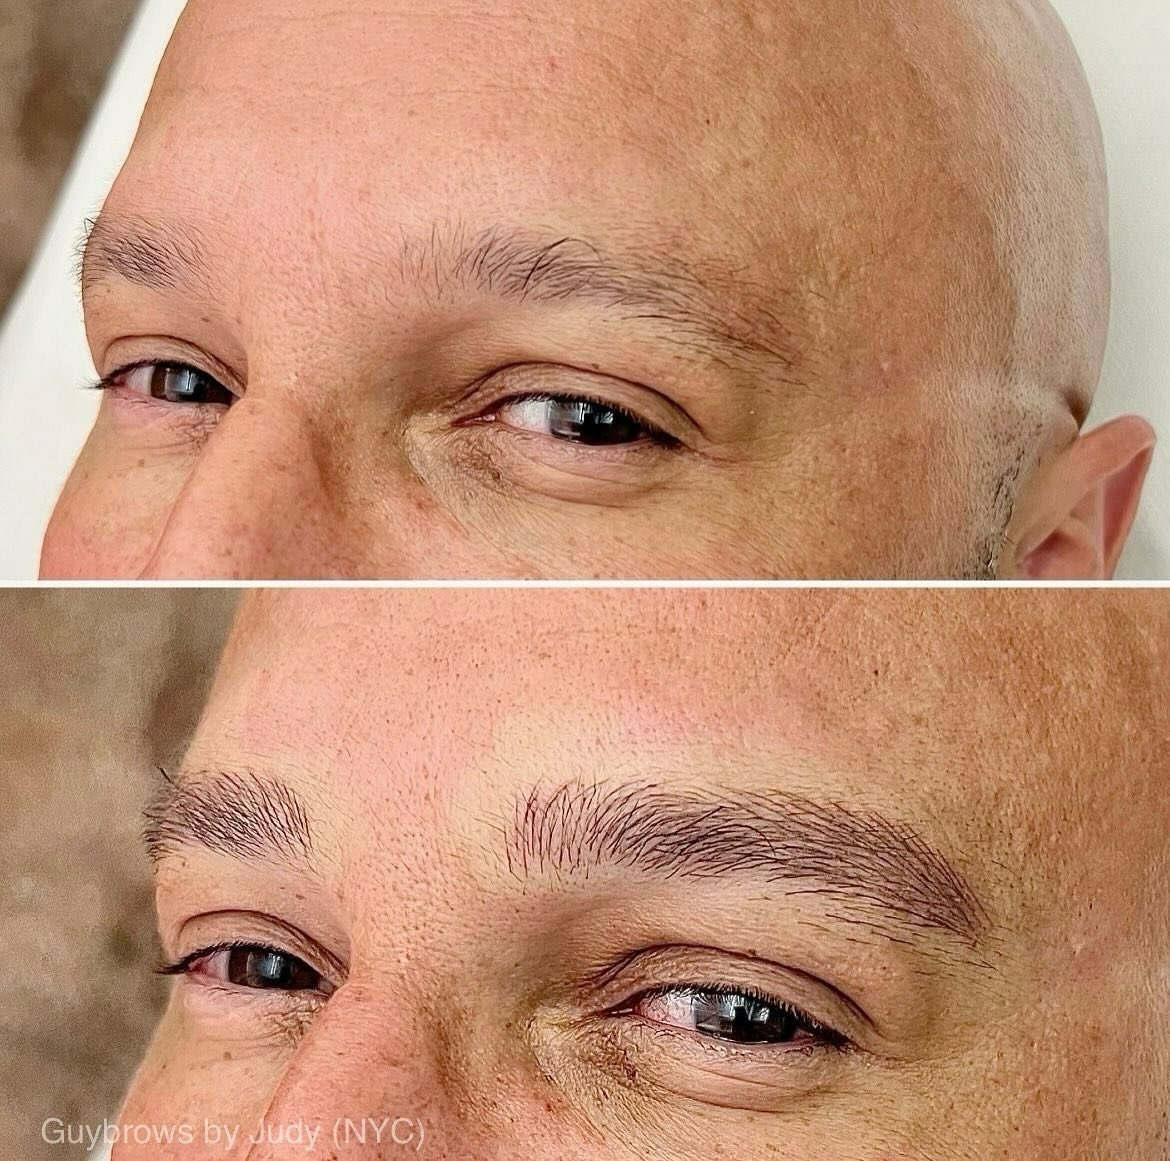 Loving this gentleman&rsquo;s full, strong and very natural Microblading. The brows help add youthful definition to the face. 
.
Guybrows by Judy (NYC)
.
#microblading #microbladingformen #guybrows #mensbrows #mensgrooming #mensbrows